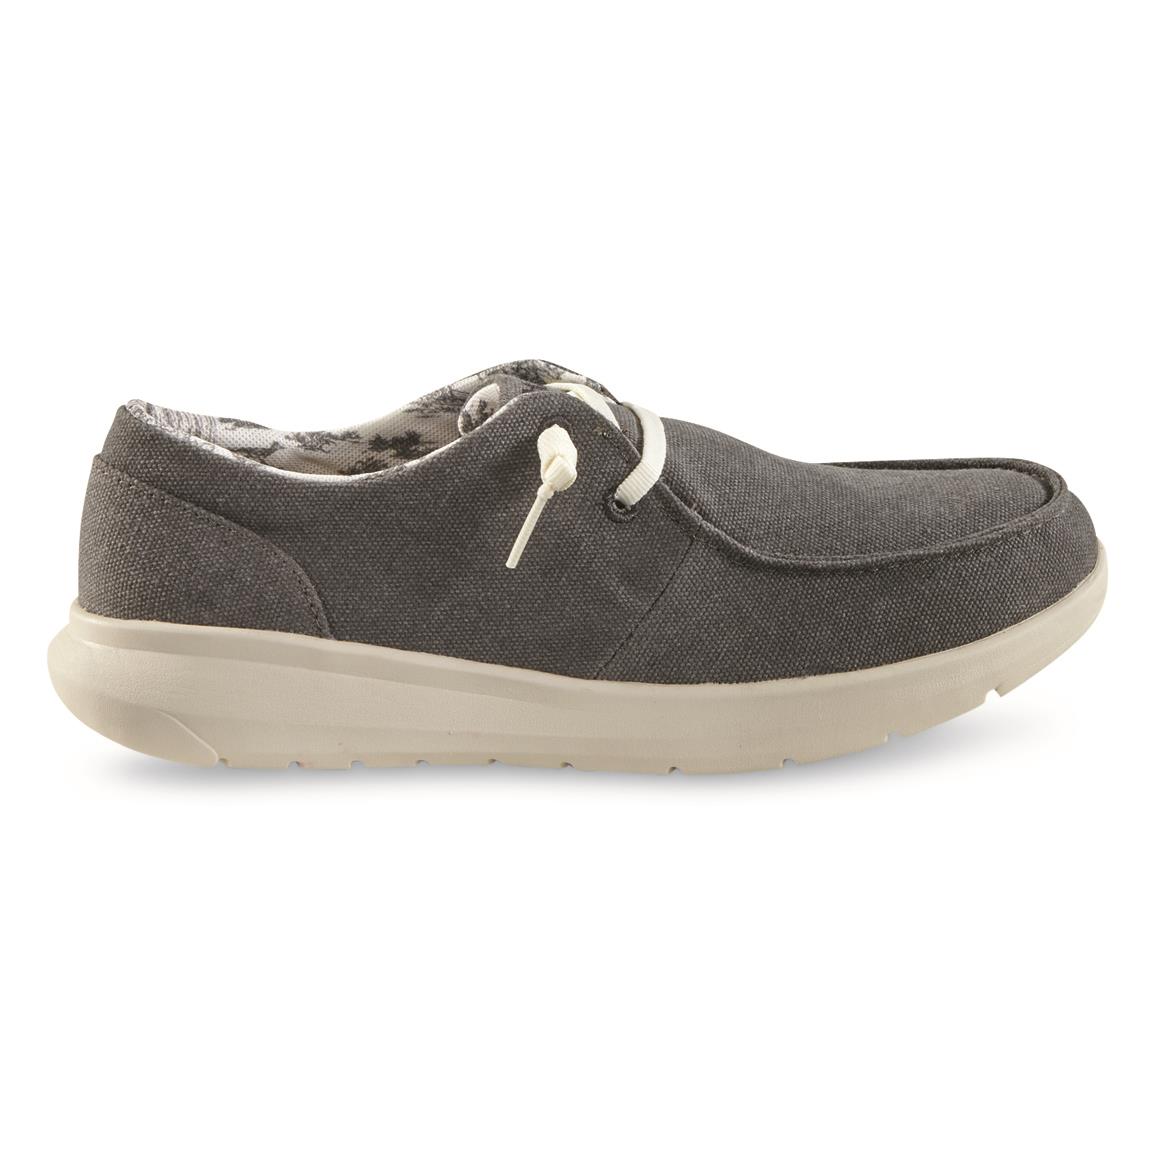 Ariat Women's Cruiser Slip-on Shoes - 717492, Casual Shoes at Sportsman ...